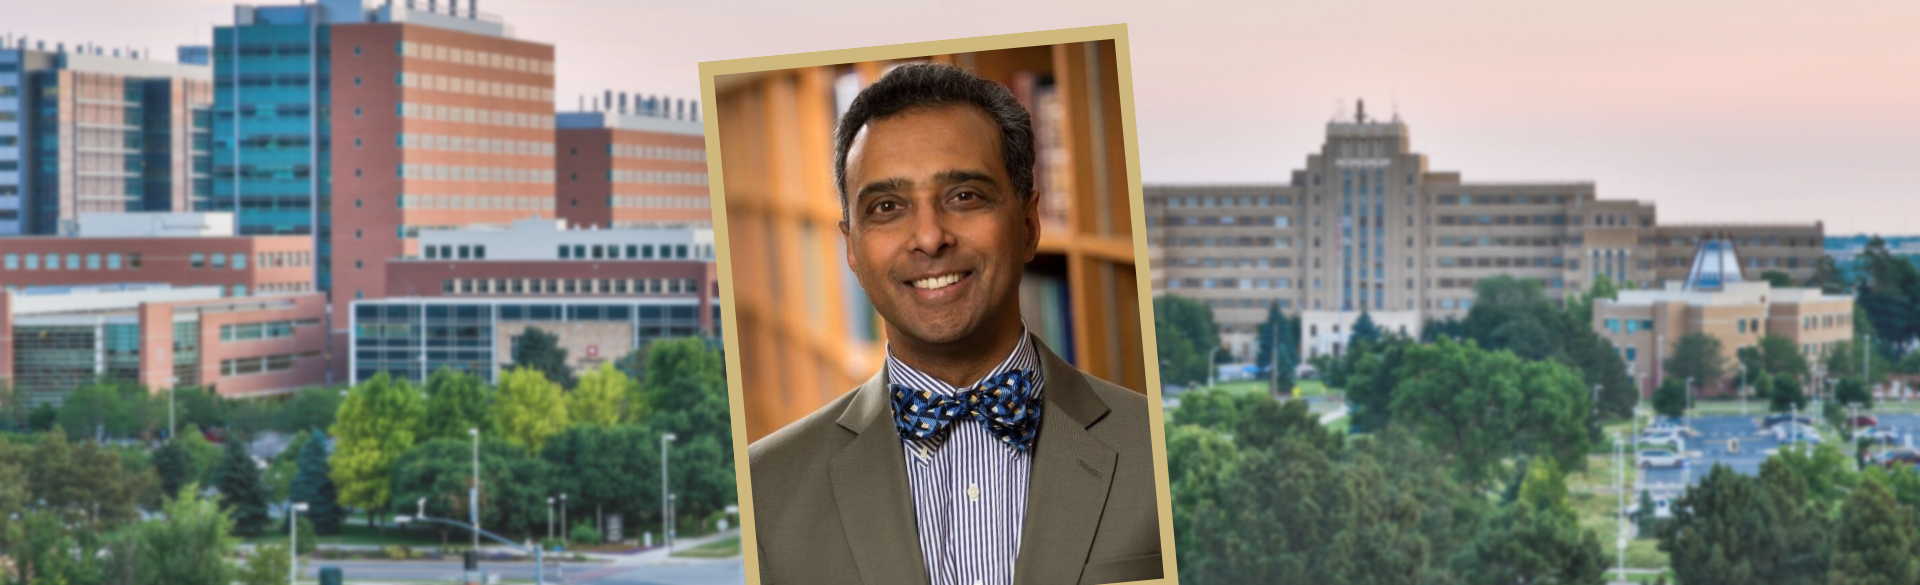 Prem Subramanian, MD, PhD, chief of neuro-ophthalmology at the Sue Anschutz-Rodgers Eye Center, was named the inaugural Clifford R. and Janice N. Merrill Endowed Chair in Ophthalmology.